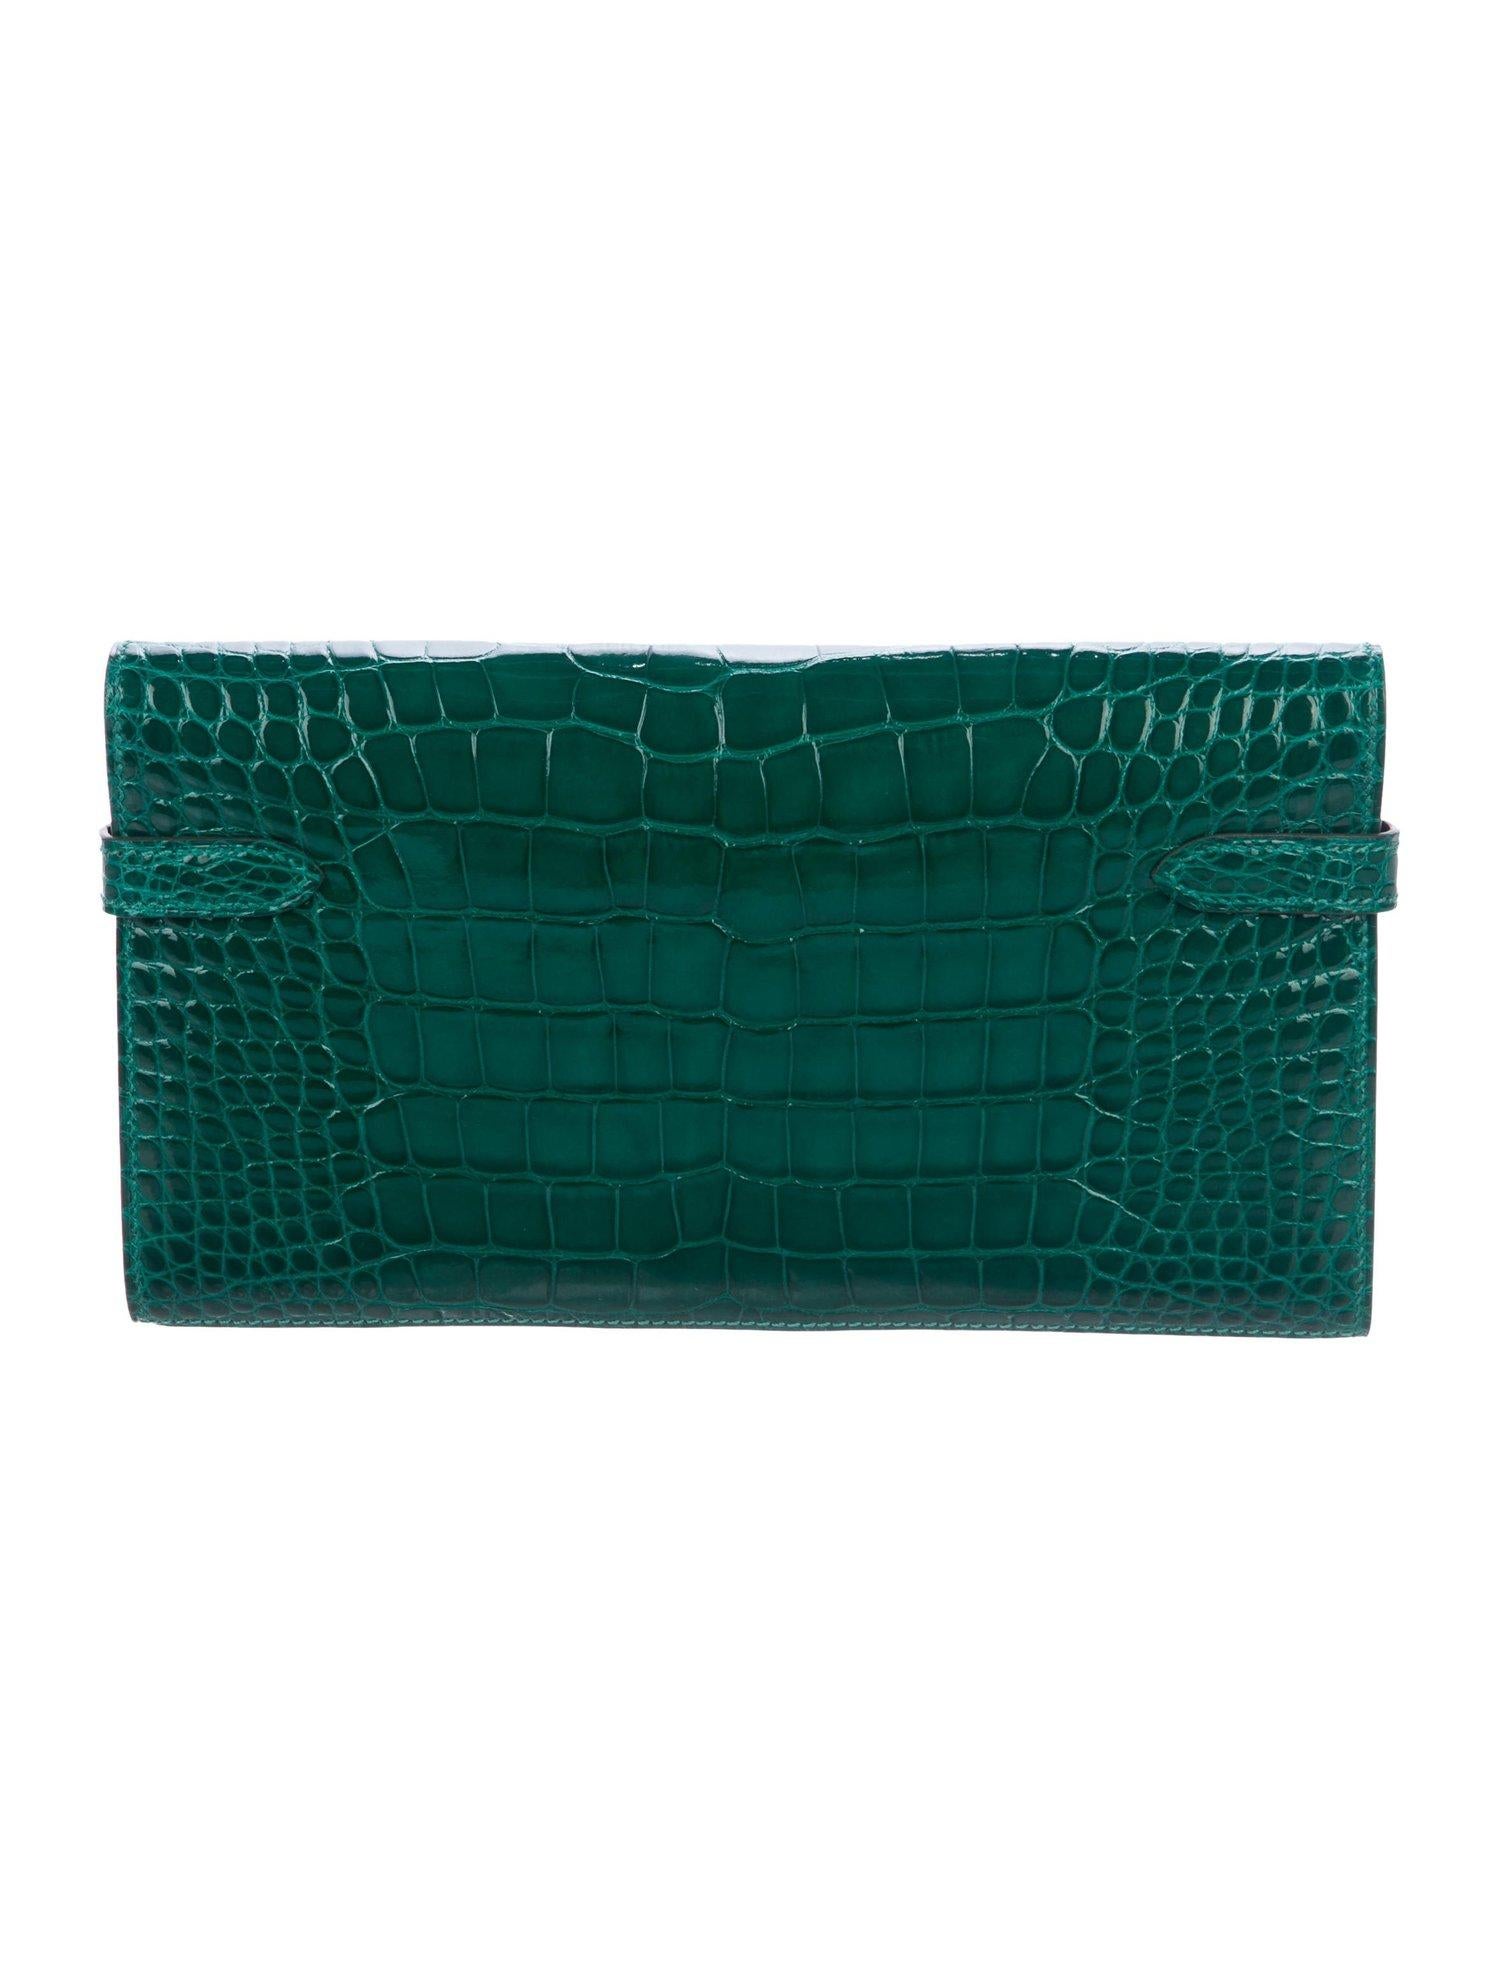 Hermes Kelly Green Alligator Exotic Leather Gold Evening Kelly Clutch Wallet Bag in Box

Alligator 
Gold tone hardware
Turnlock closure
Leather lining
Date code present
Made in France
Features zip closure, bill compartment and 12 card slots